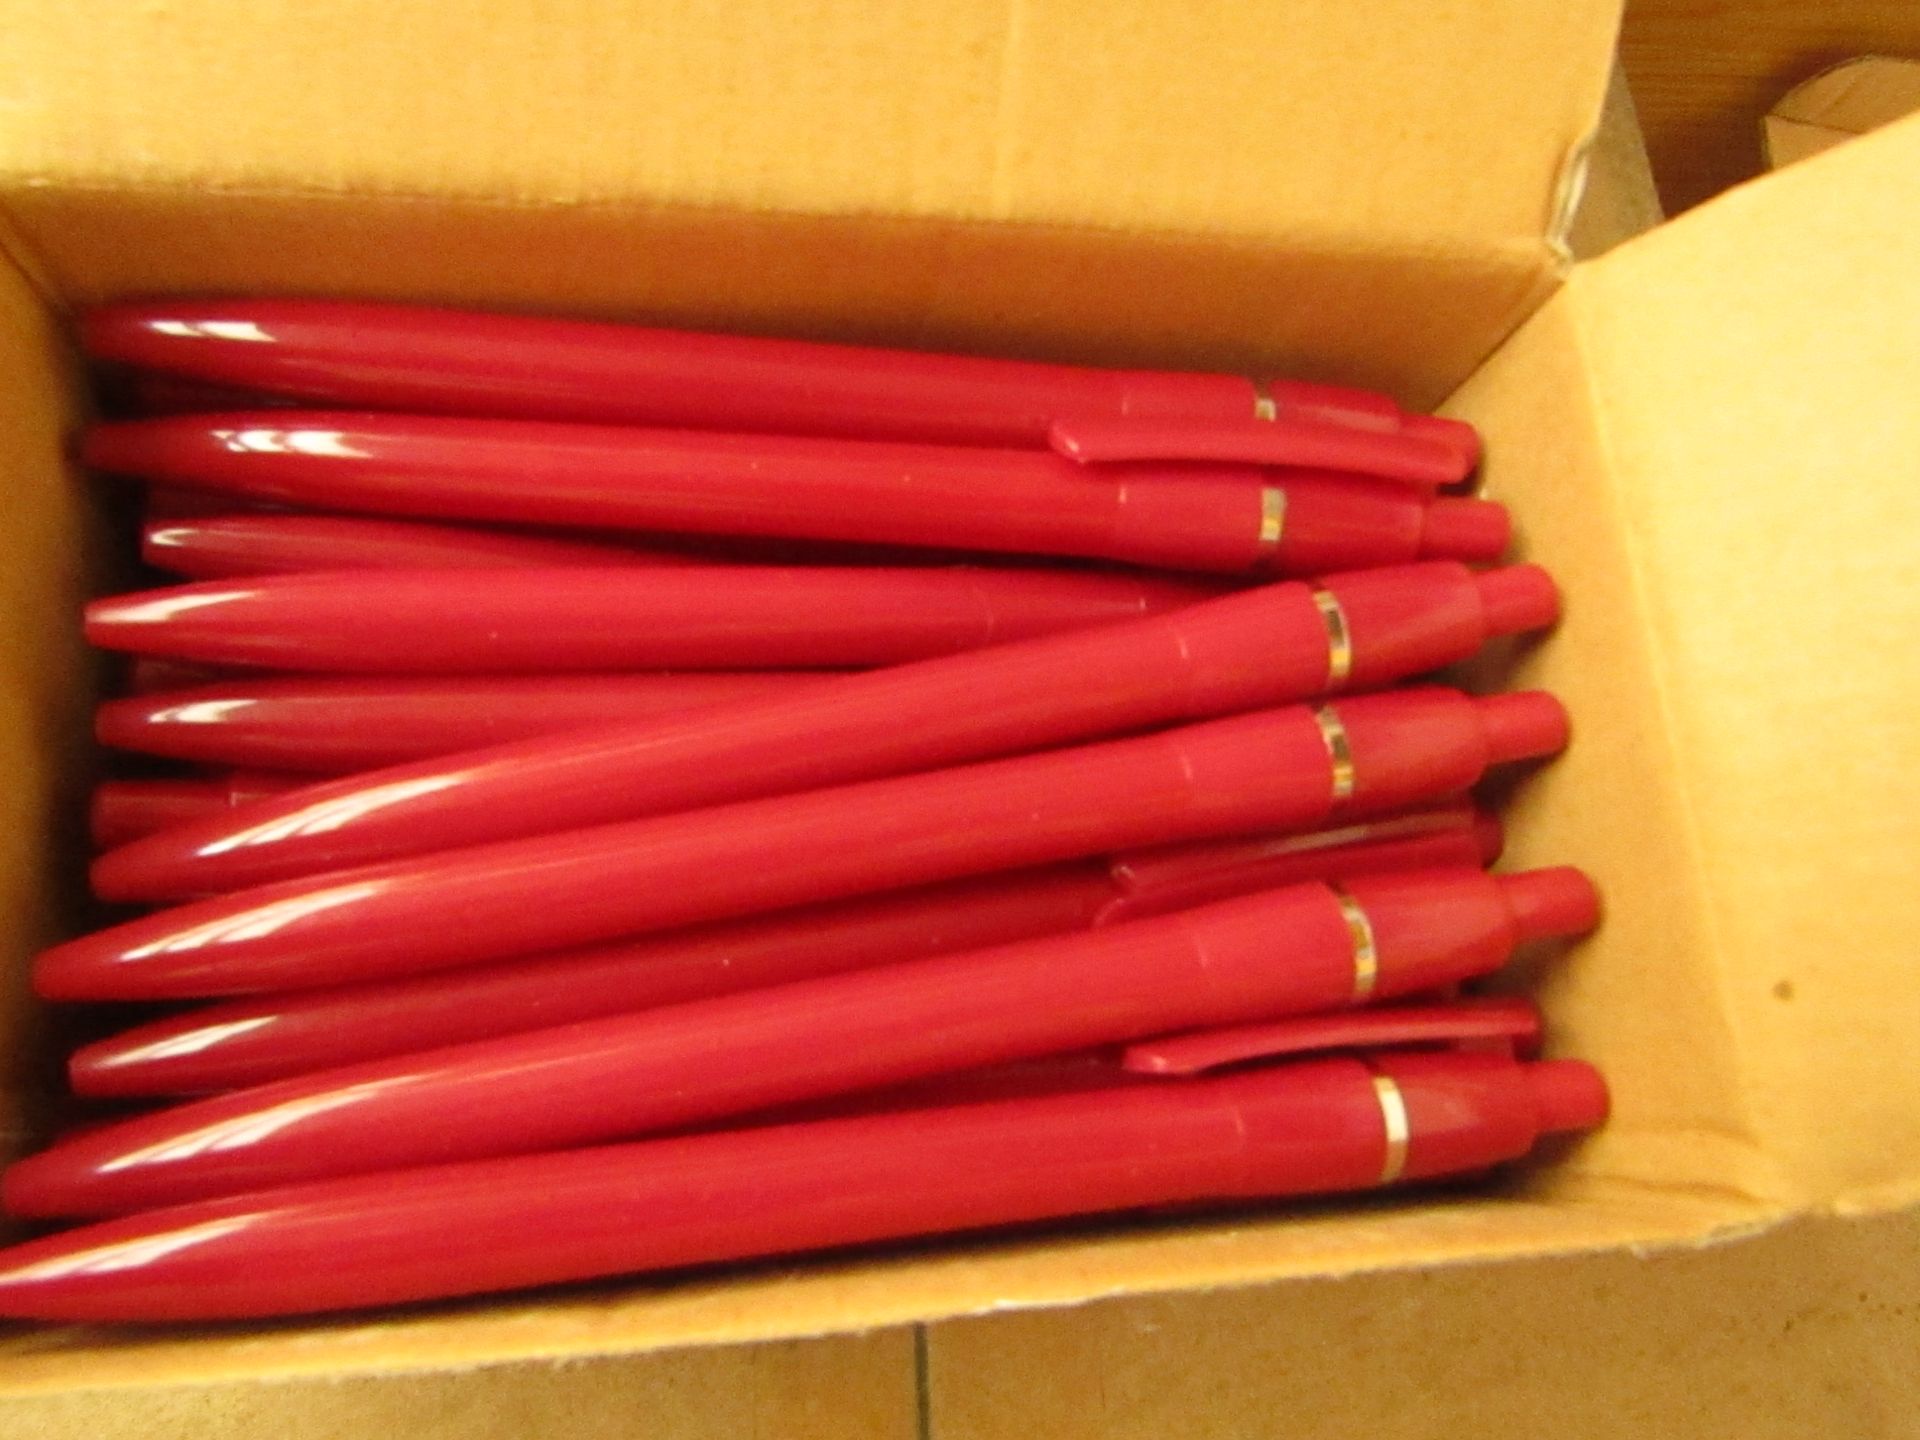 Box of 50 Black Ink Pens. Boxed. See Image For Design